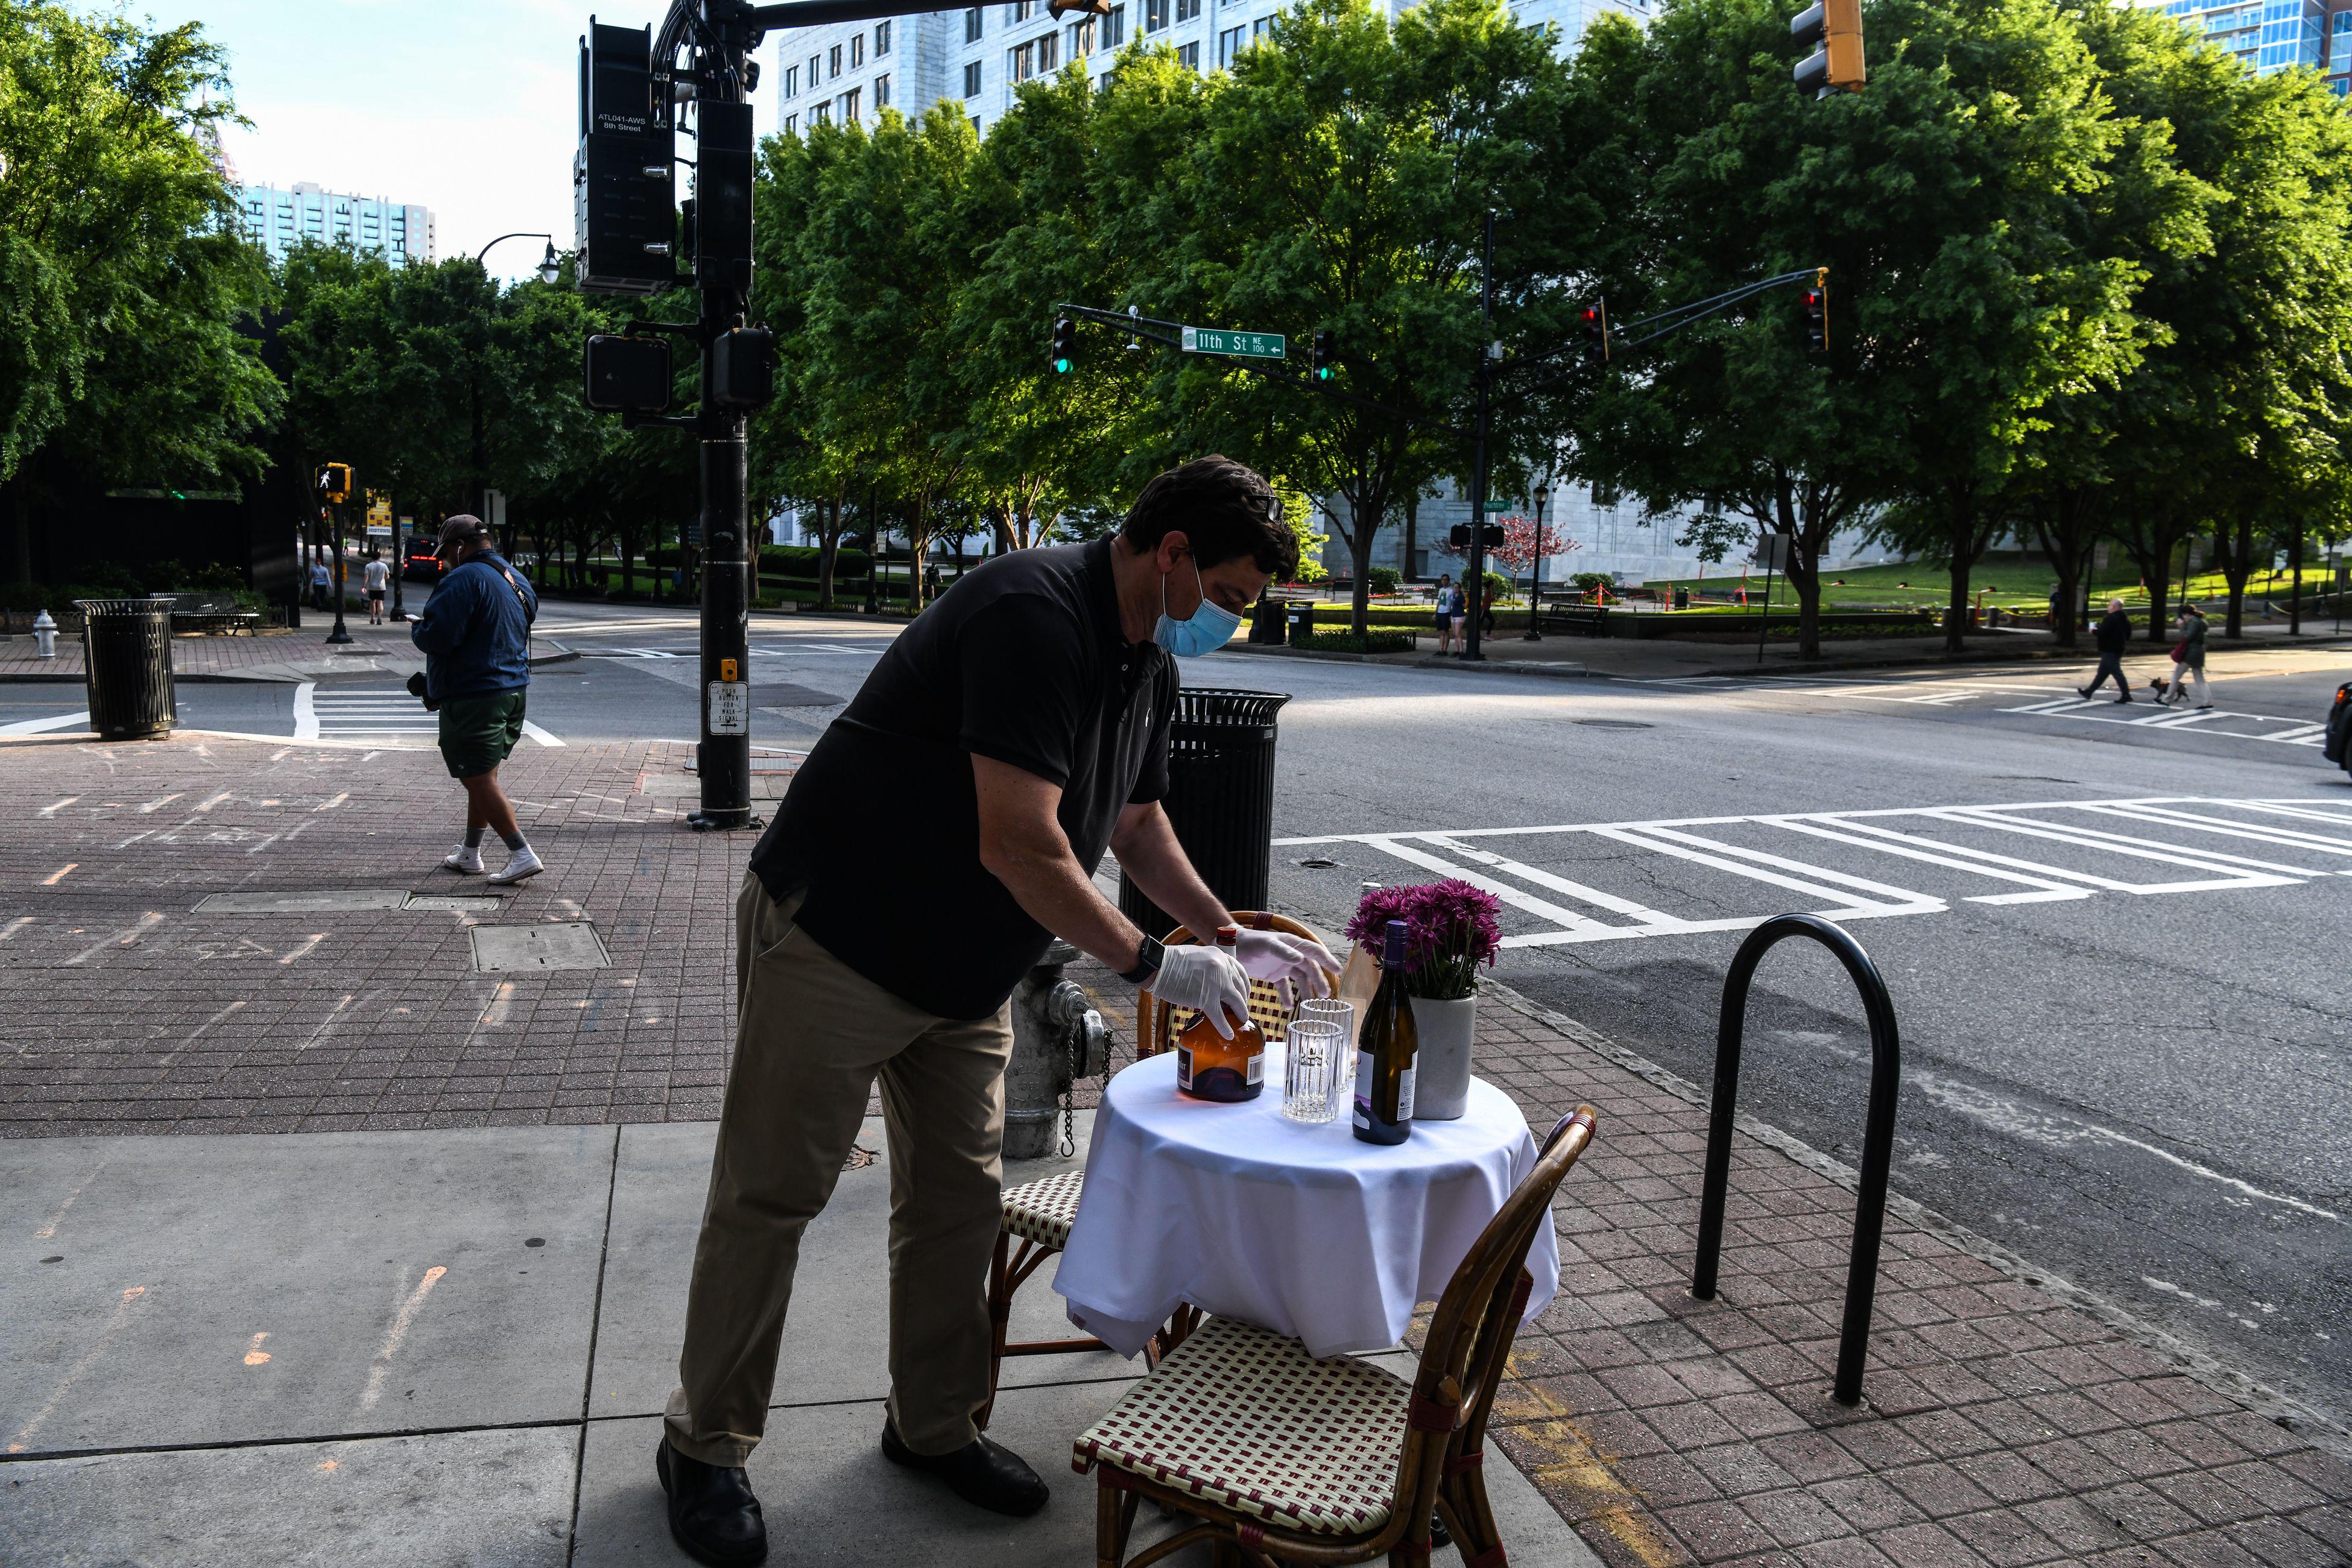 A man decorates a bistro table outside his restaurant amid the novel coronavirus pandemic in Atlanta, Georgia on April 27, 2020. - Some Georgia restaurants reopened on April 27, 2020 for limited dine-in service as the state loosened more coronavirus restrictions. (Photo by CHANDAN KHANNA / AFP) (Photo by CHANDAN KHANNA/AFP via Getty Images)